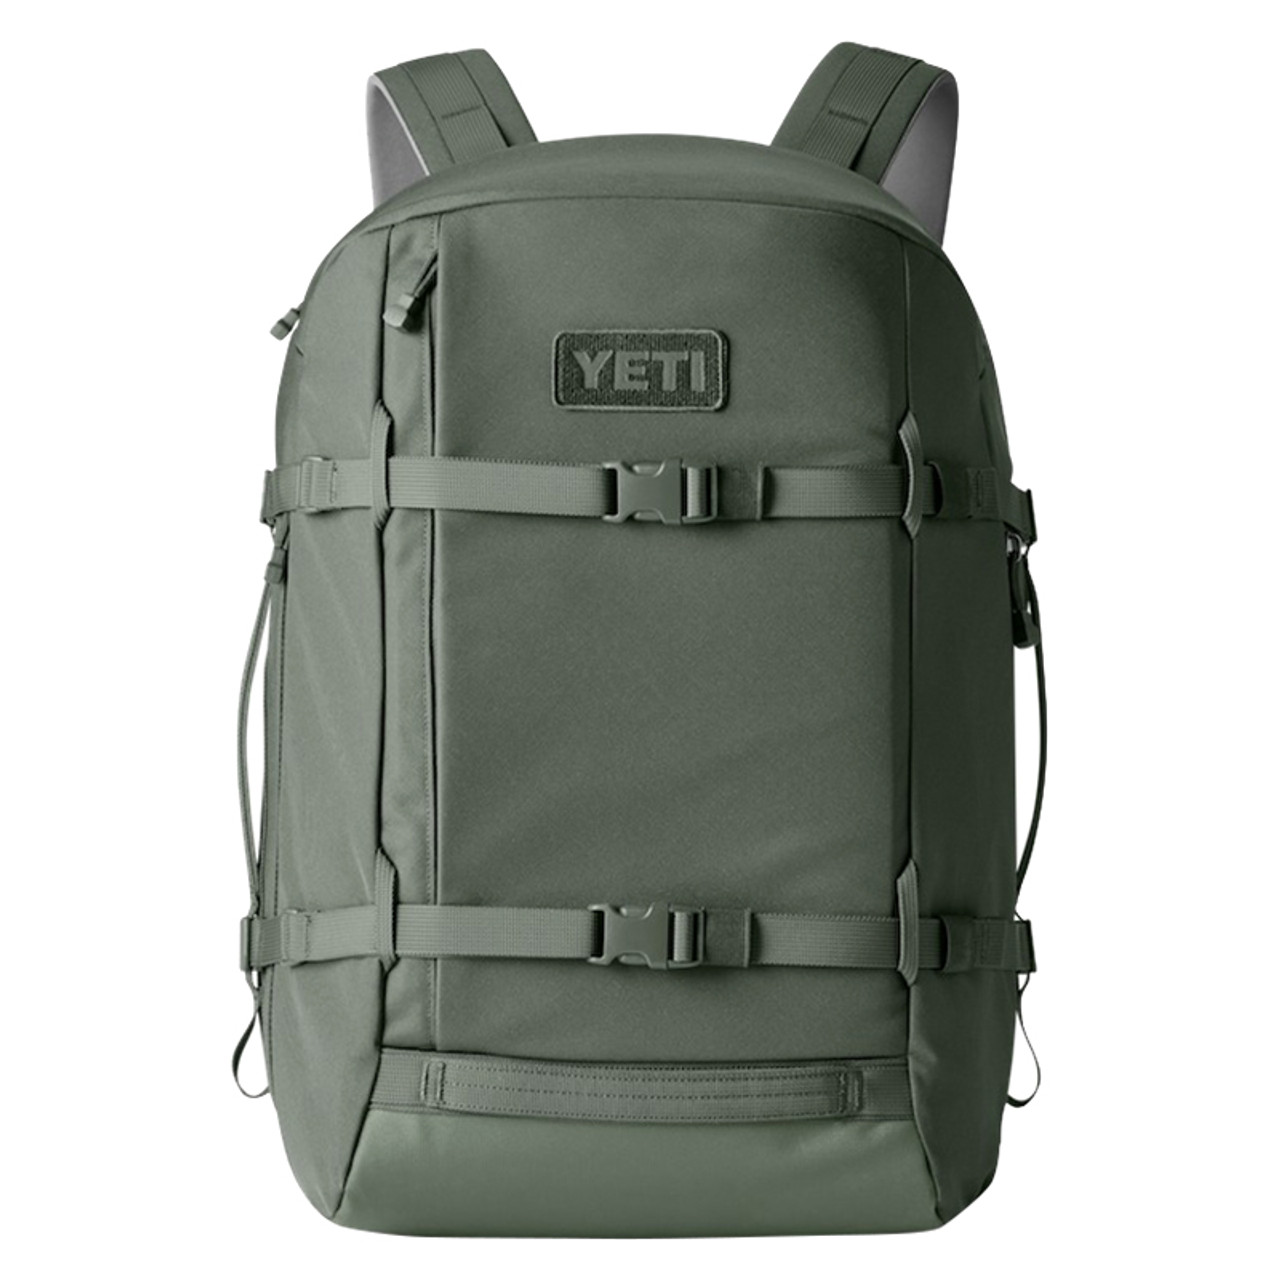 YETI's bag collection will make the perfect holiday gift